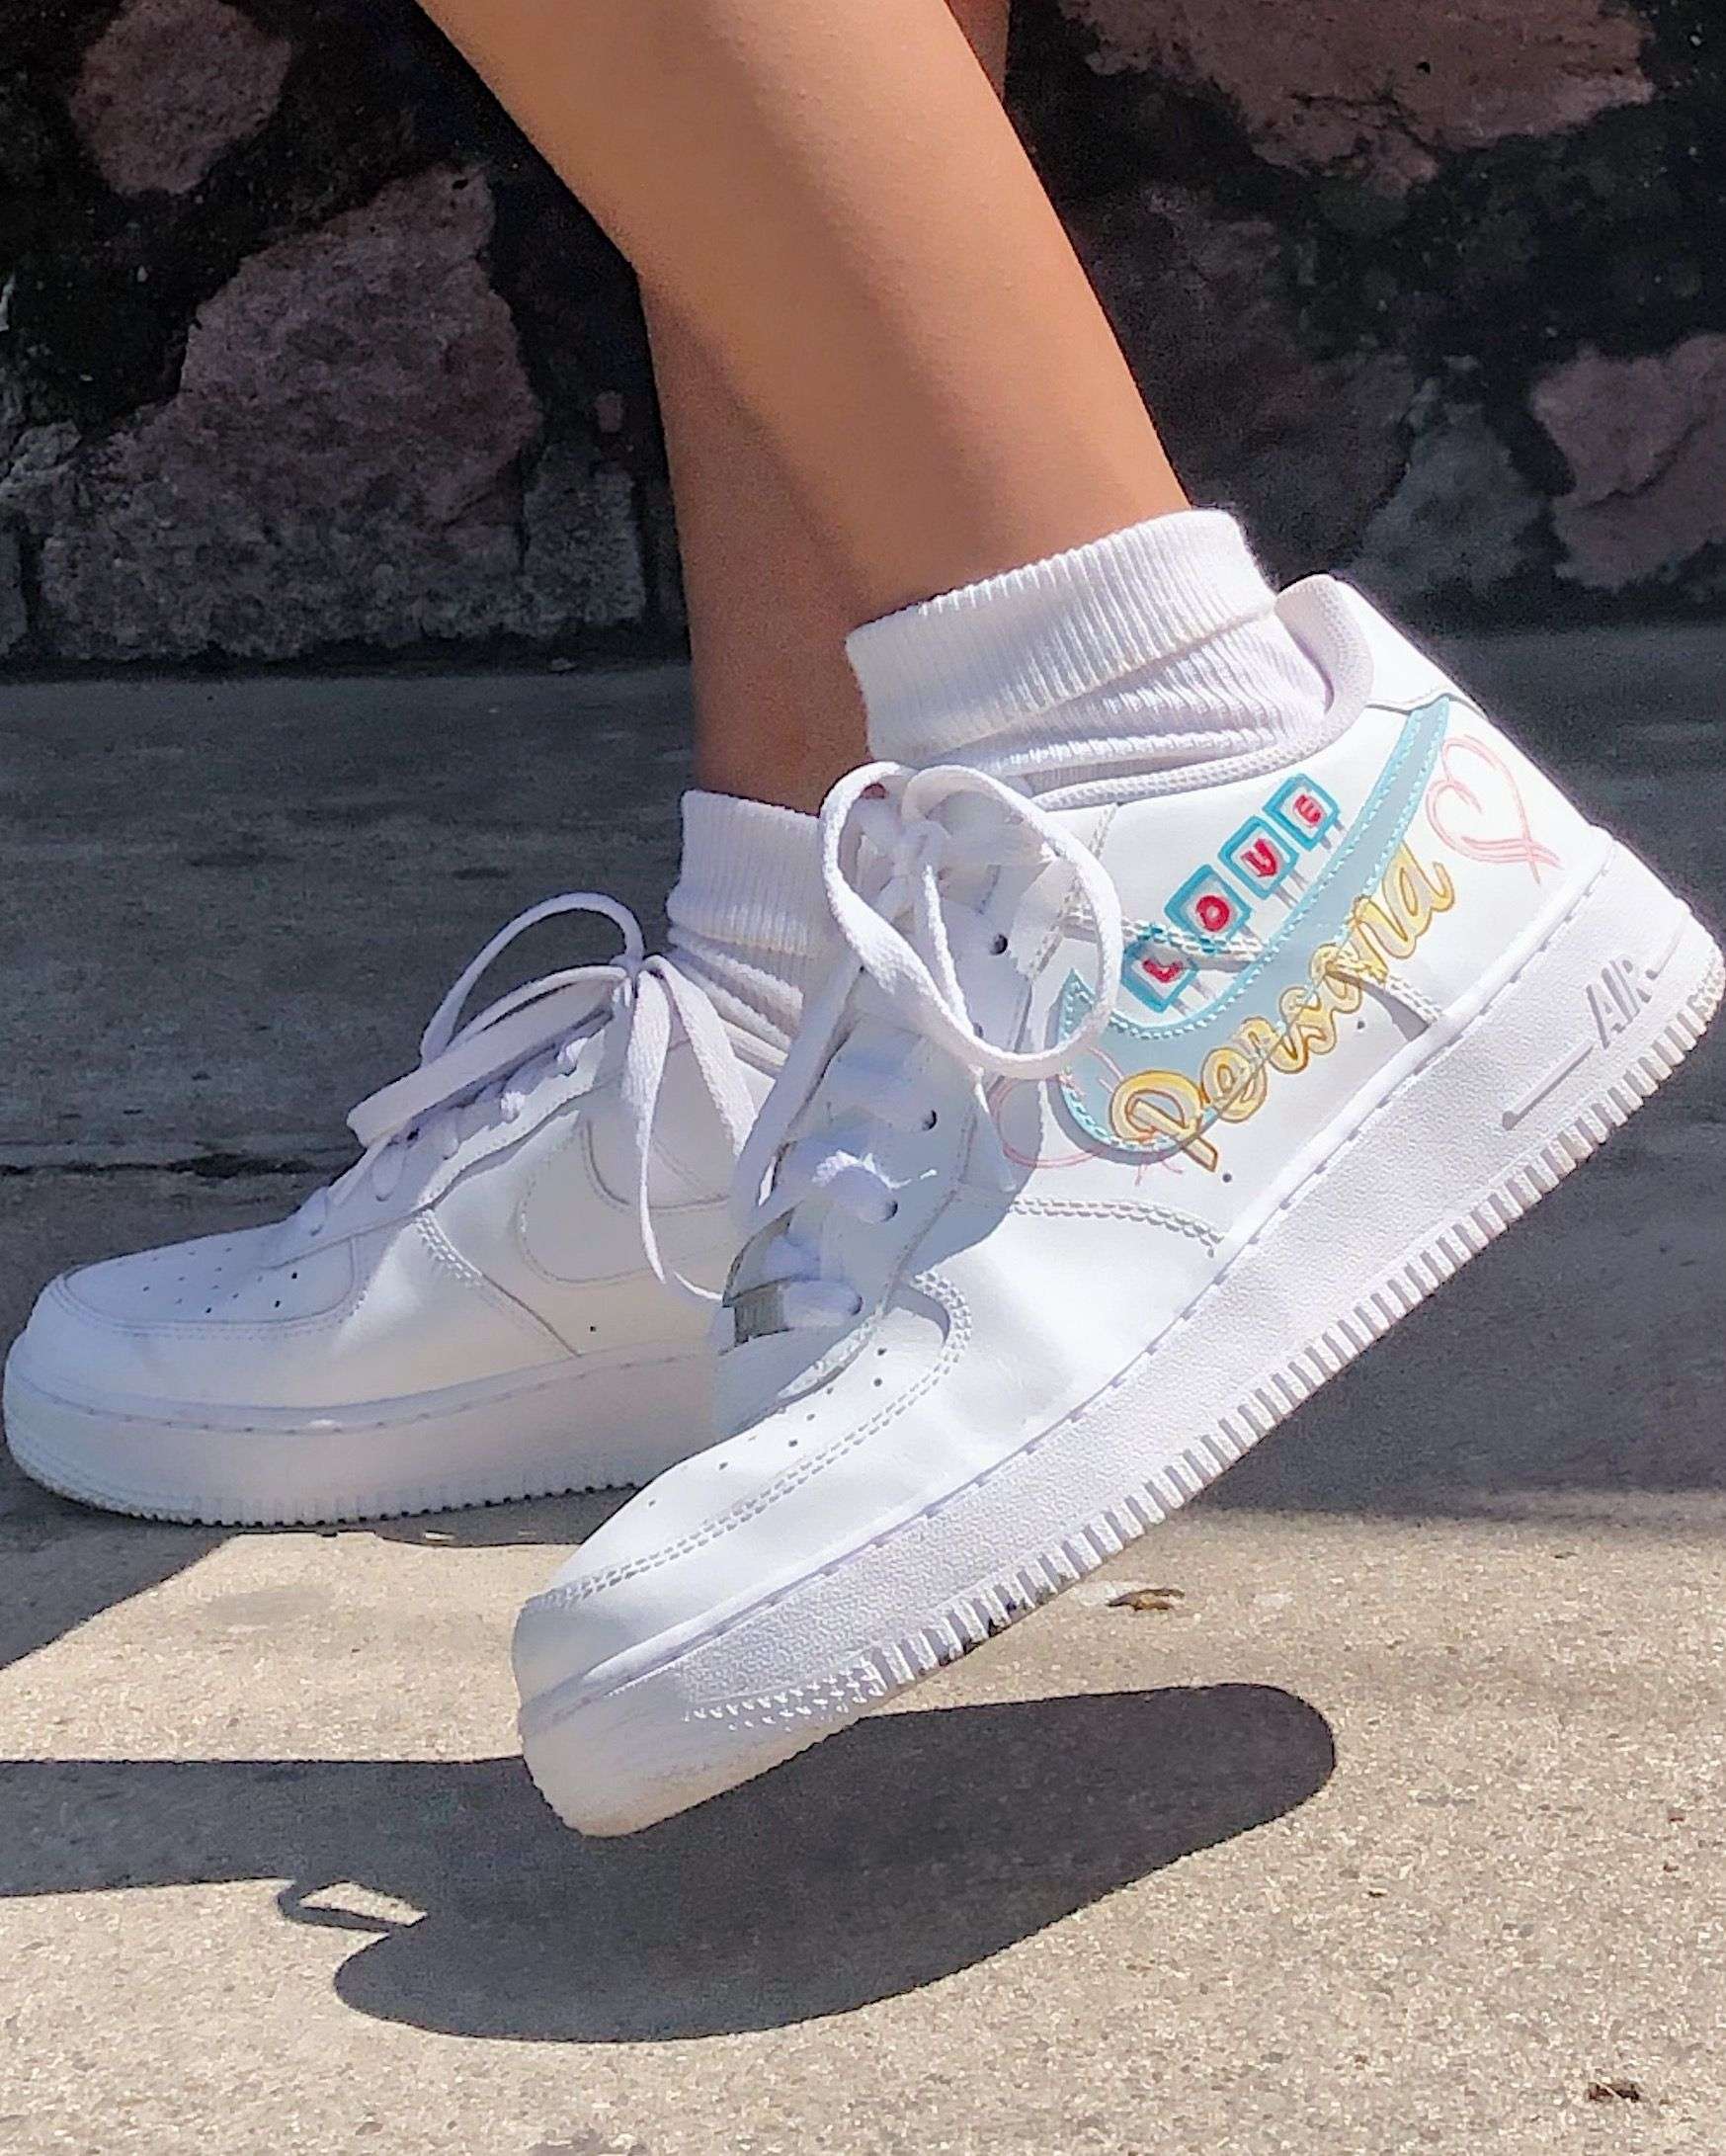 custom shoe bts boy with luv inspired custom shoes by ...